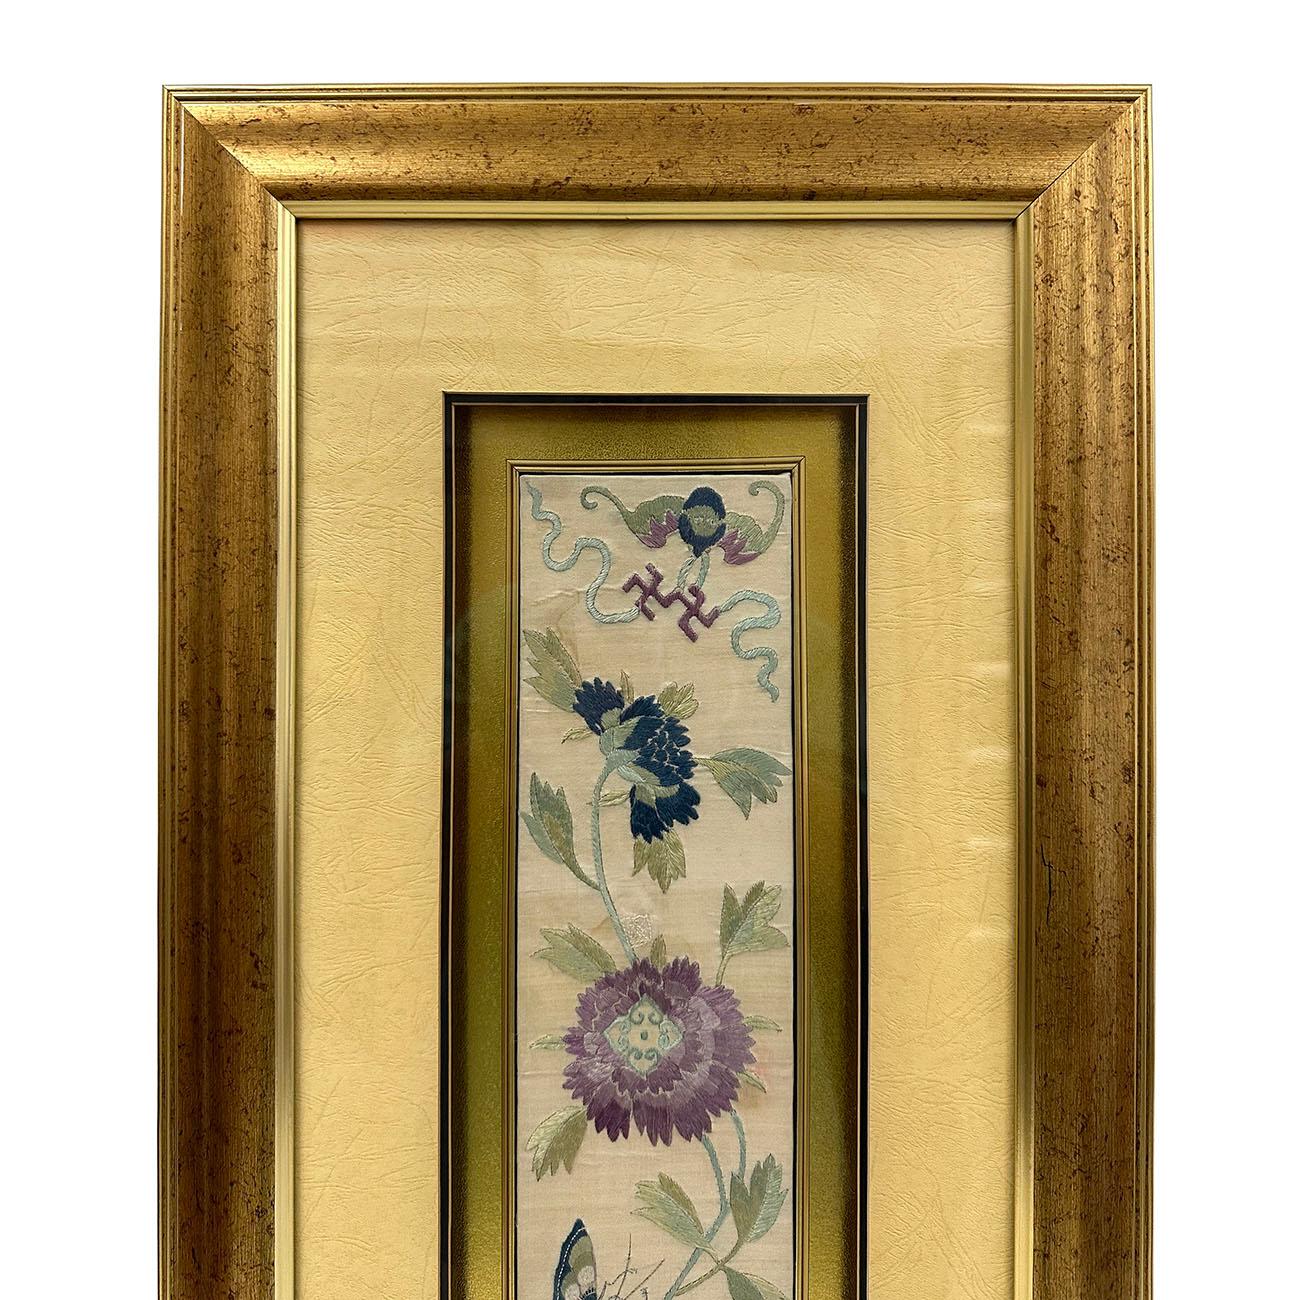 An antique Chinese silk embroidery in 3D framed. The museum quality display wall decor. There are numerous auspicious symbols and butterfly, floral embroidered in colored silk threads were included, such as butterfly and peony etc. The textiles are